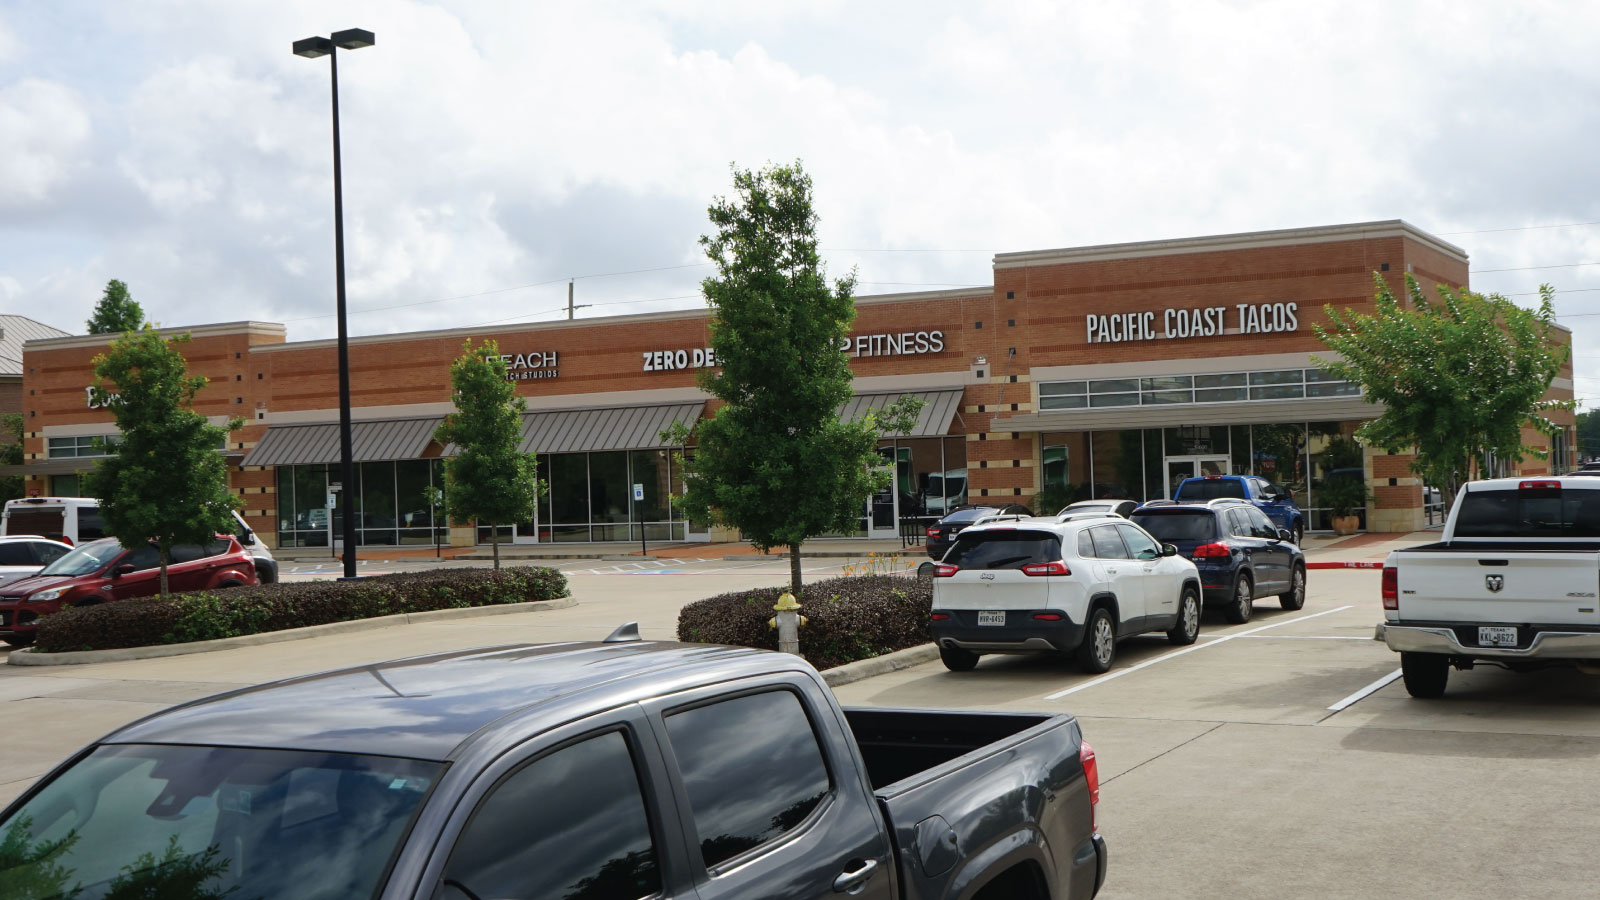 Lake Pointe Village East | Parking and retail structure backs up to Oyster Creek.